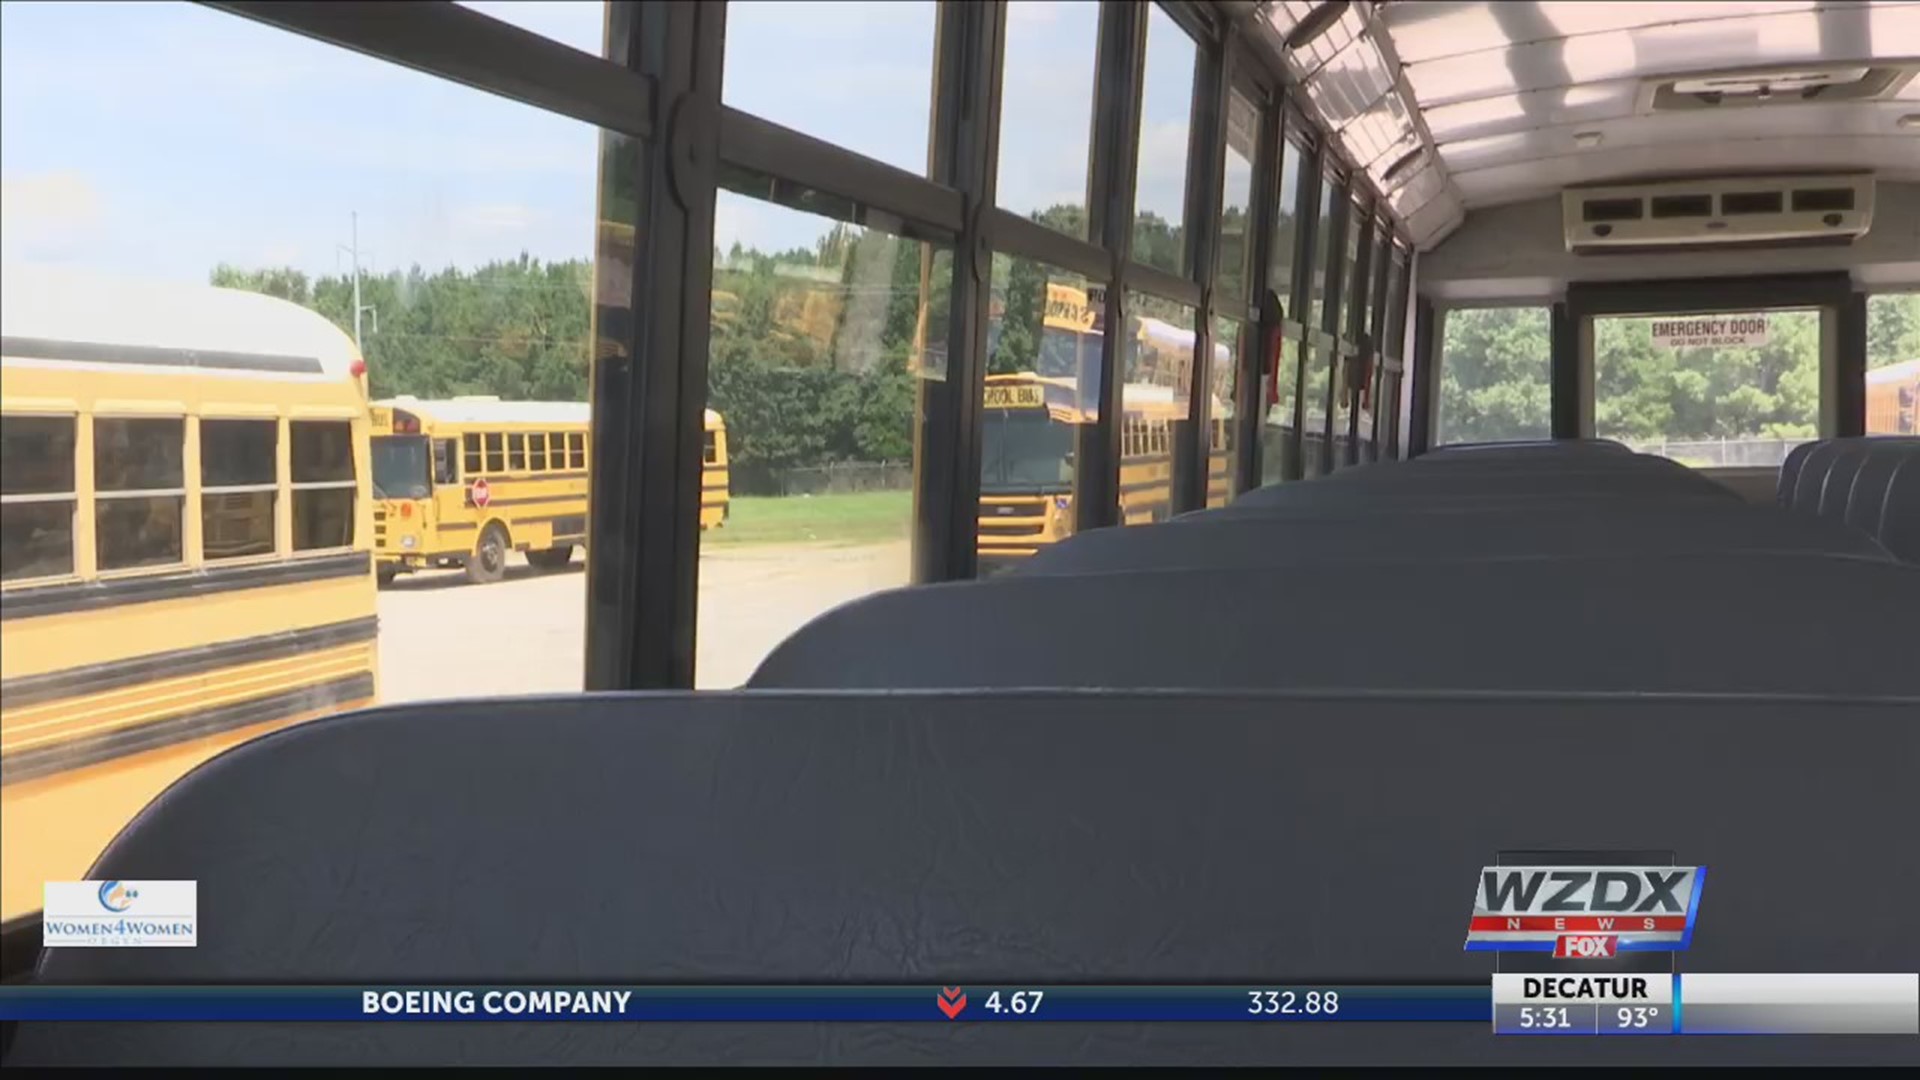 Some parents are worried as their children ride school buses with no air conditioning during a heat advisory.